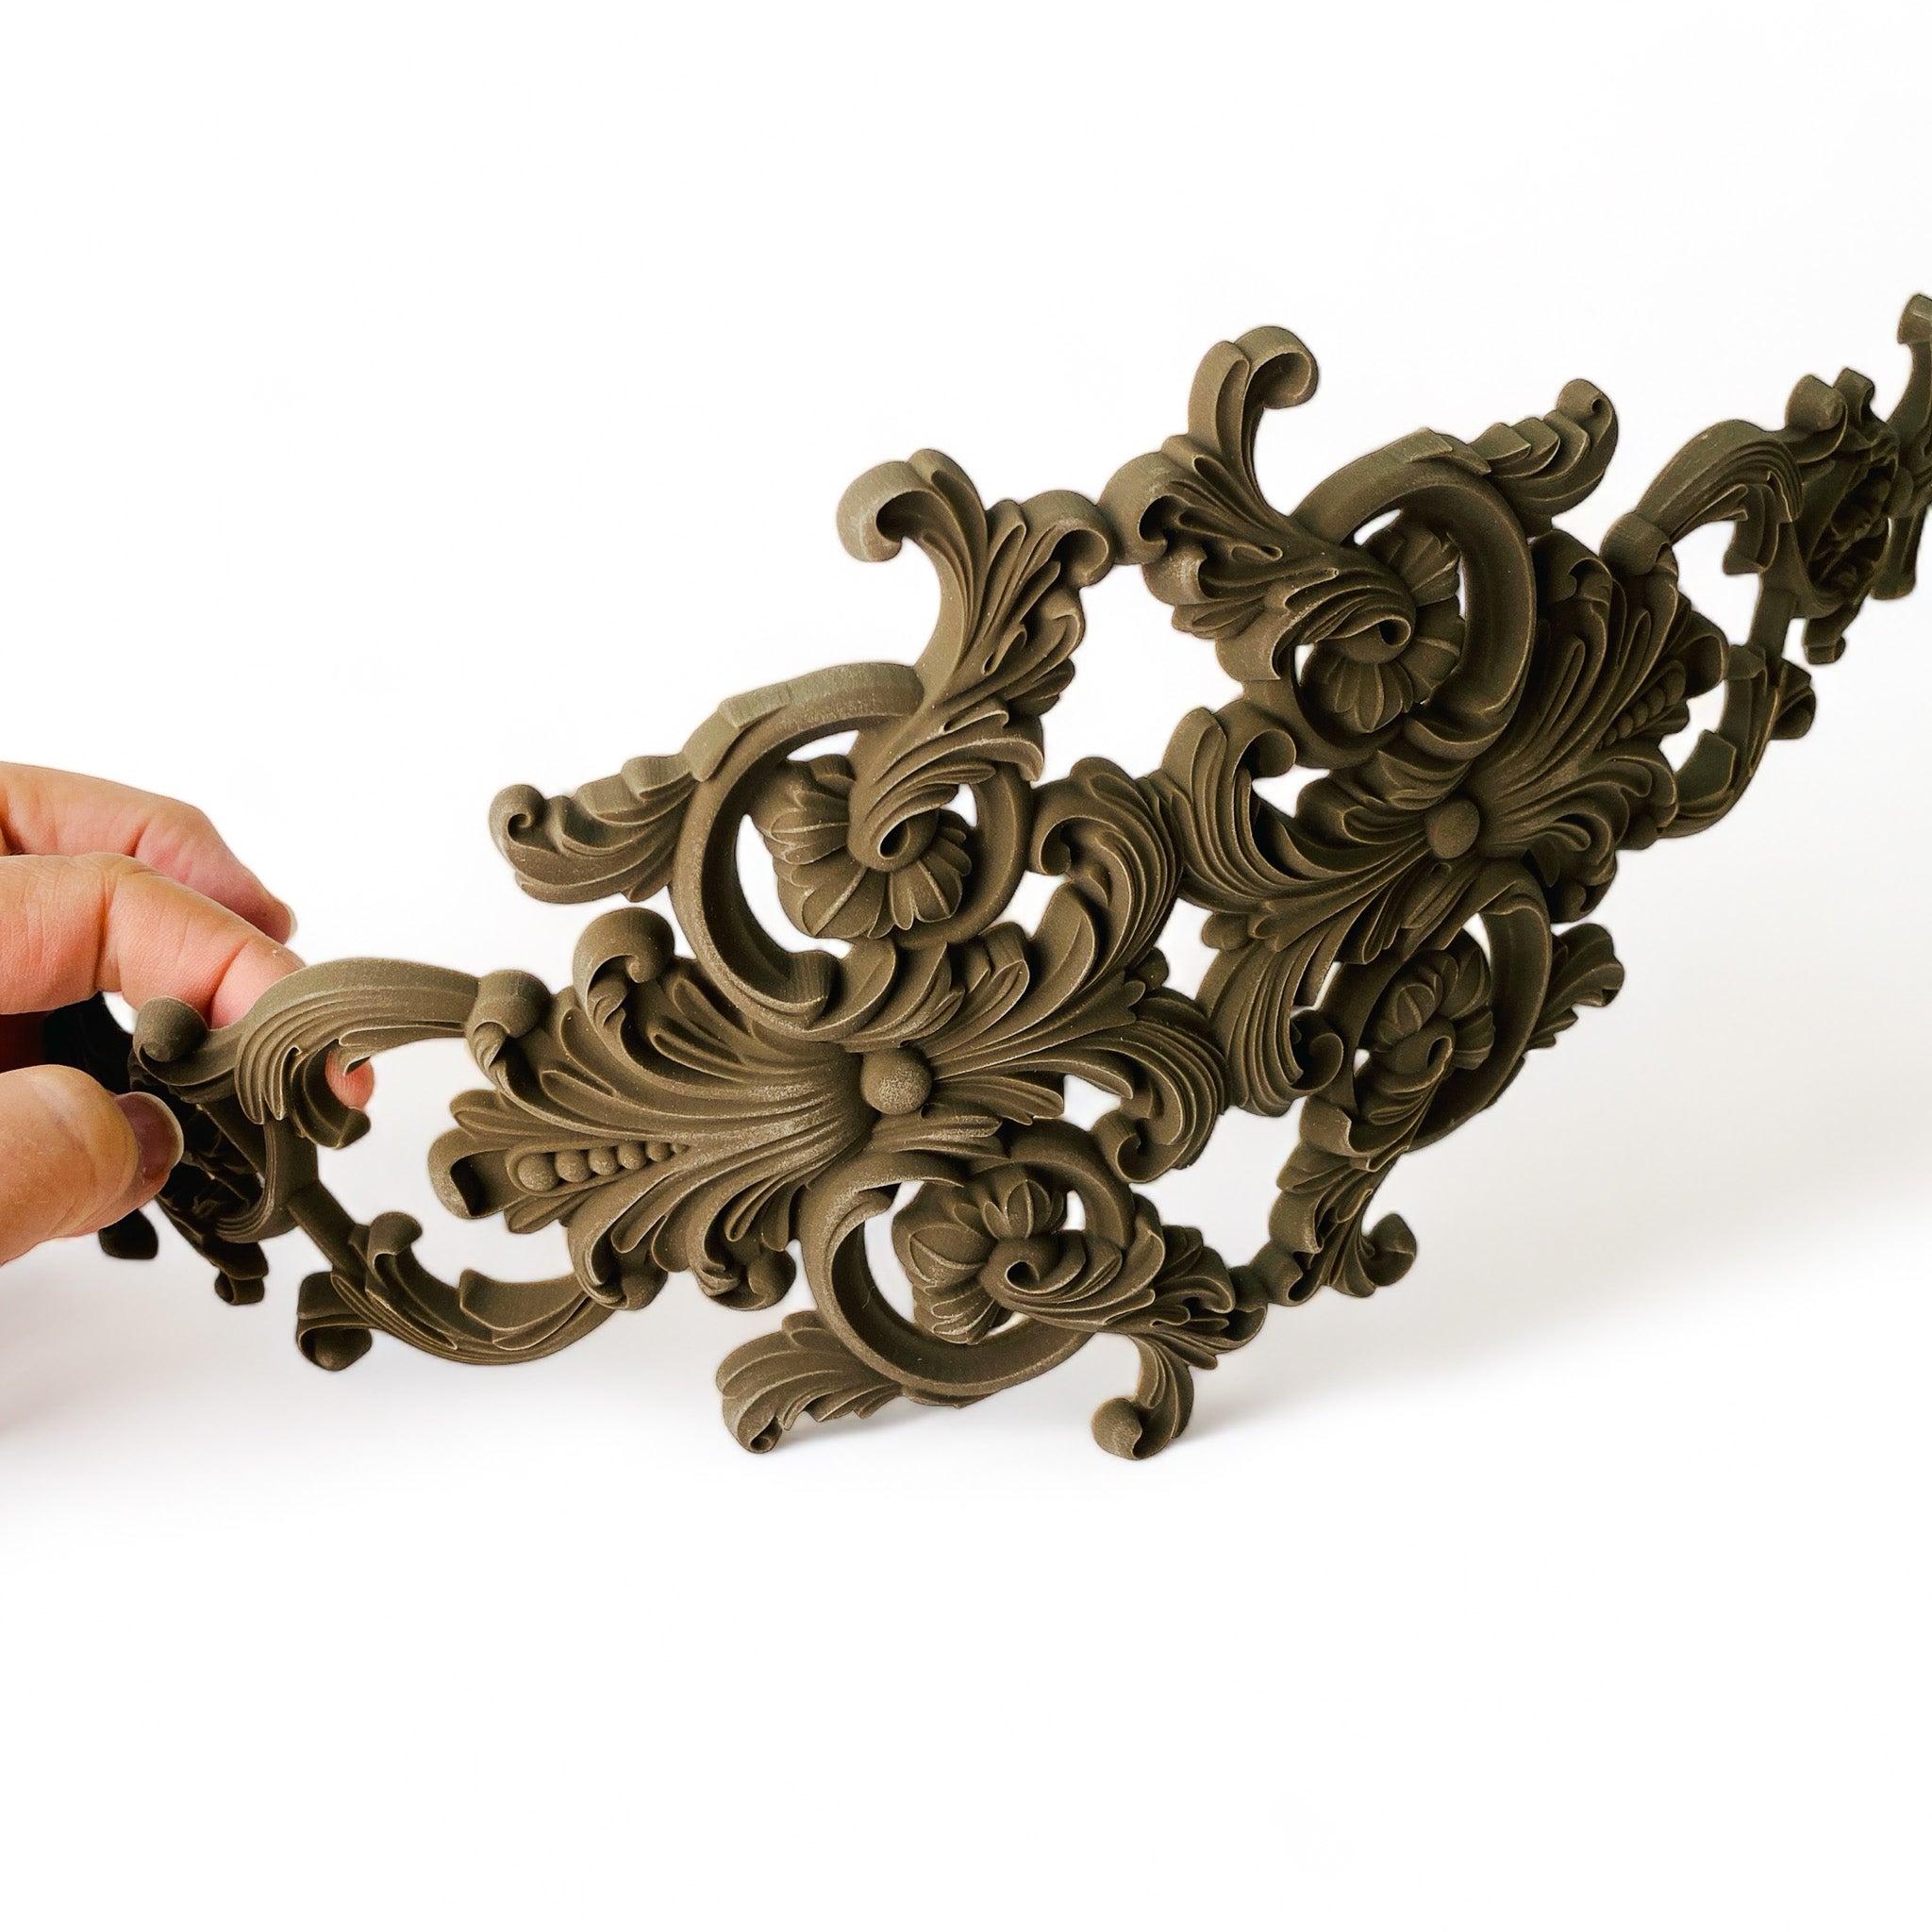 A hand holding a curved bendable furniture applique featuring scrolling ornate details is against a white background.